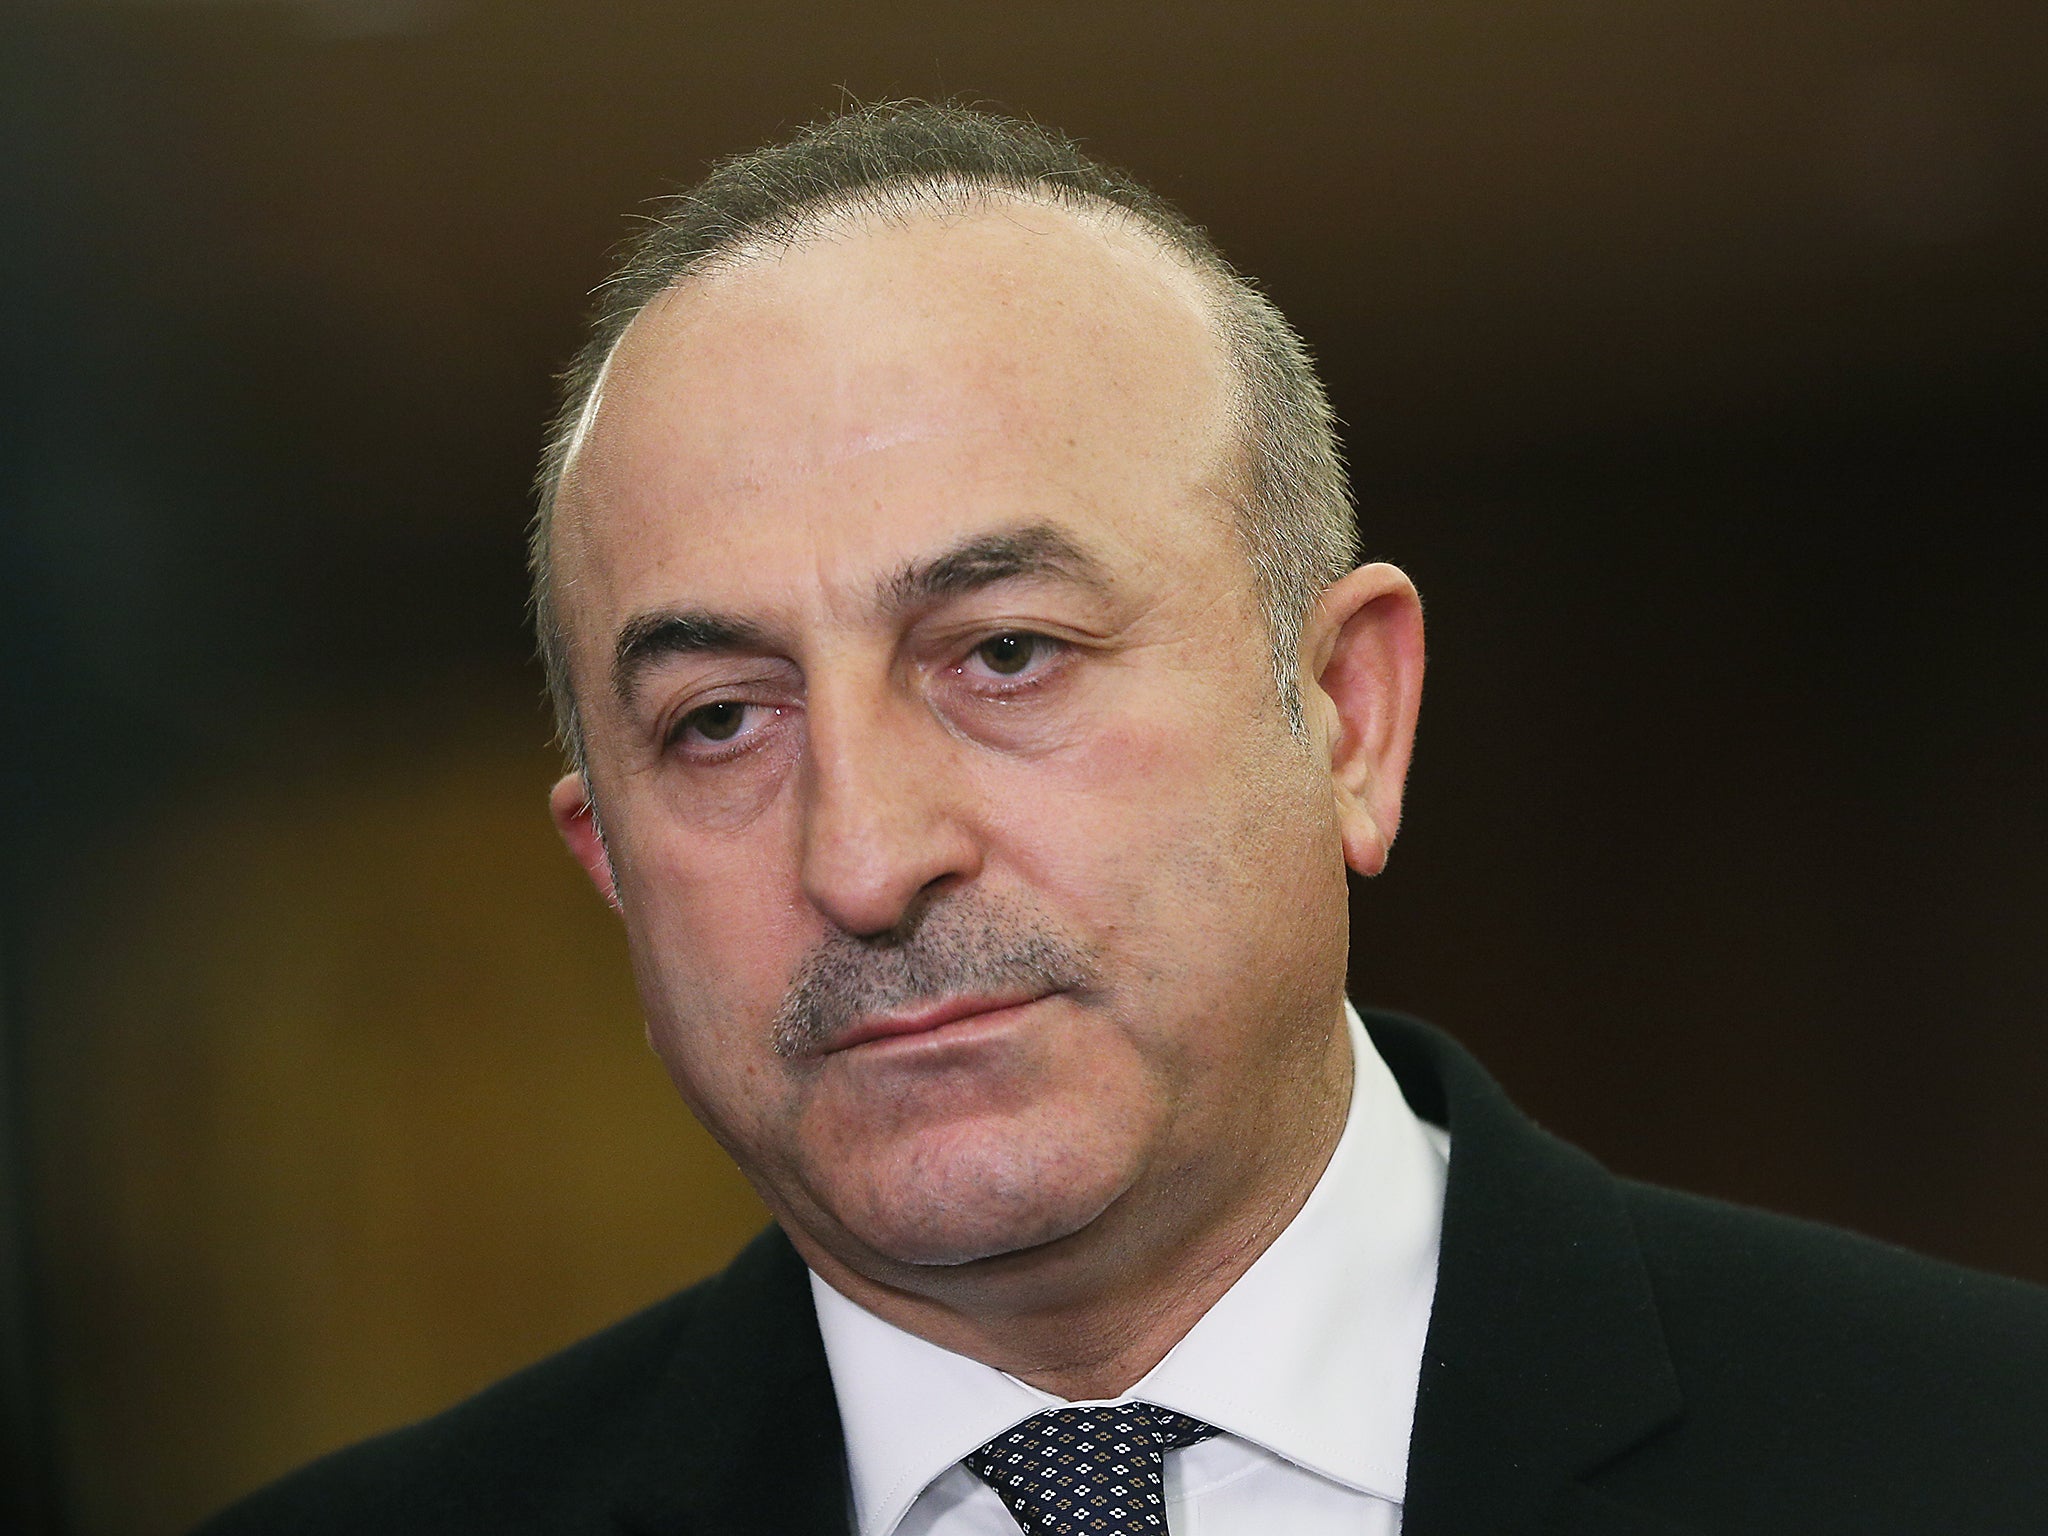 Turkey's foreign minister has been attempting to tour Europe to gather support for a constitutional referendum next month